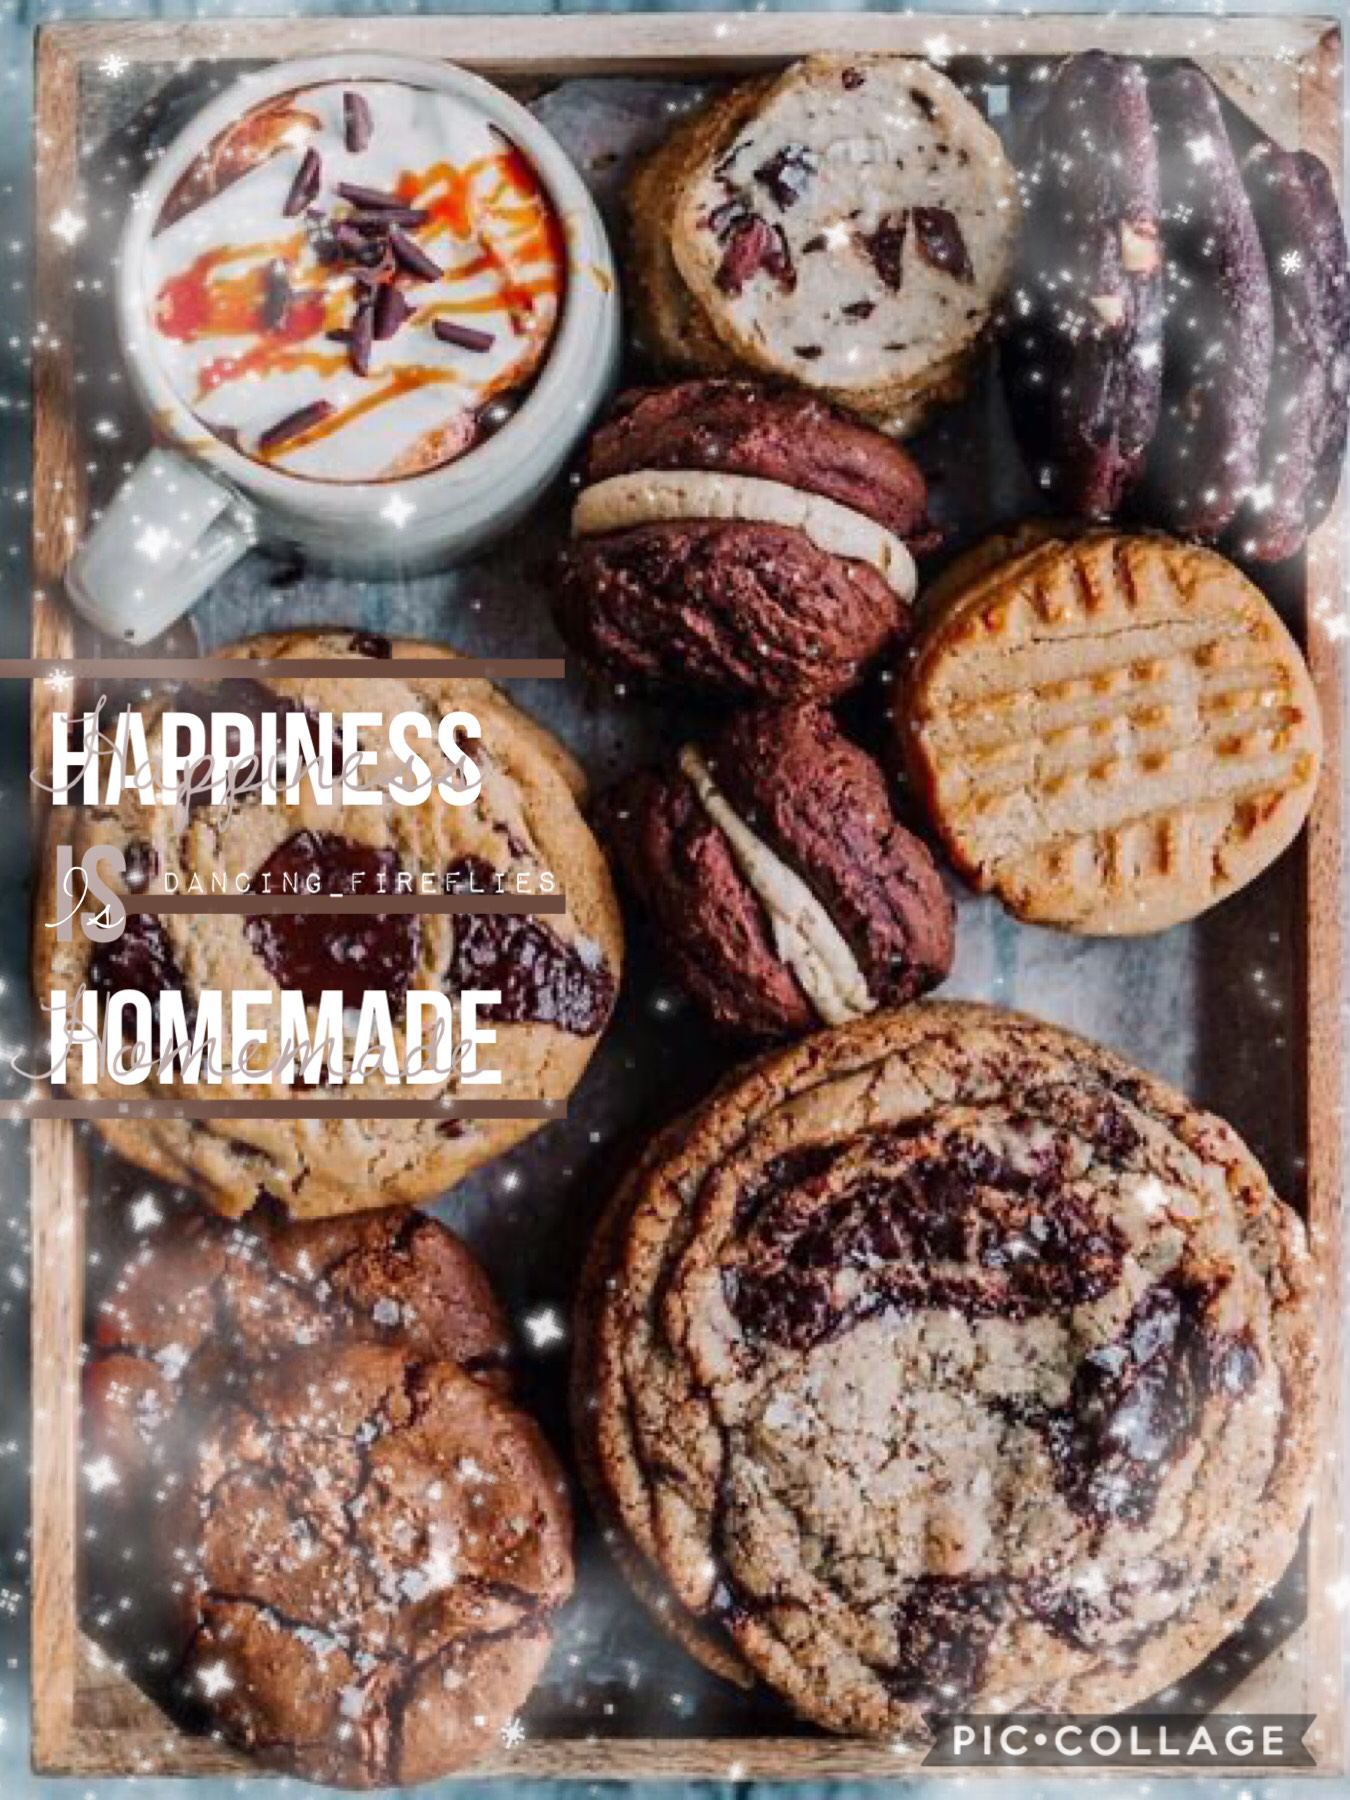 🍪TAP🍪
Thank you PicCollage for my second feature it means so much to me! Thank you all for 292 followers! Your all the best! 
Qotd: what is your favorite kind of dessert?
Aotd: I like cookies!